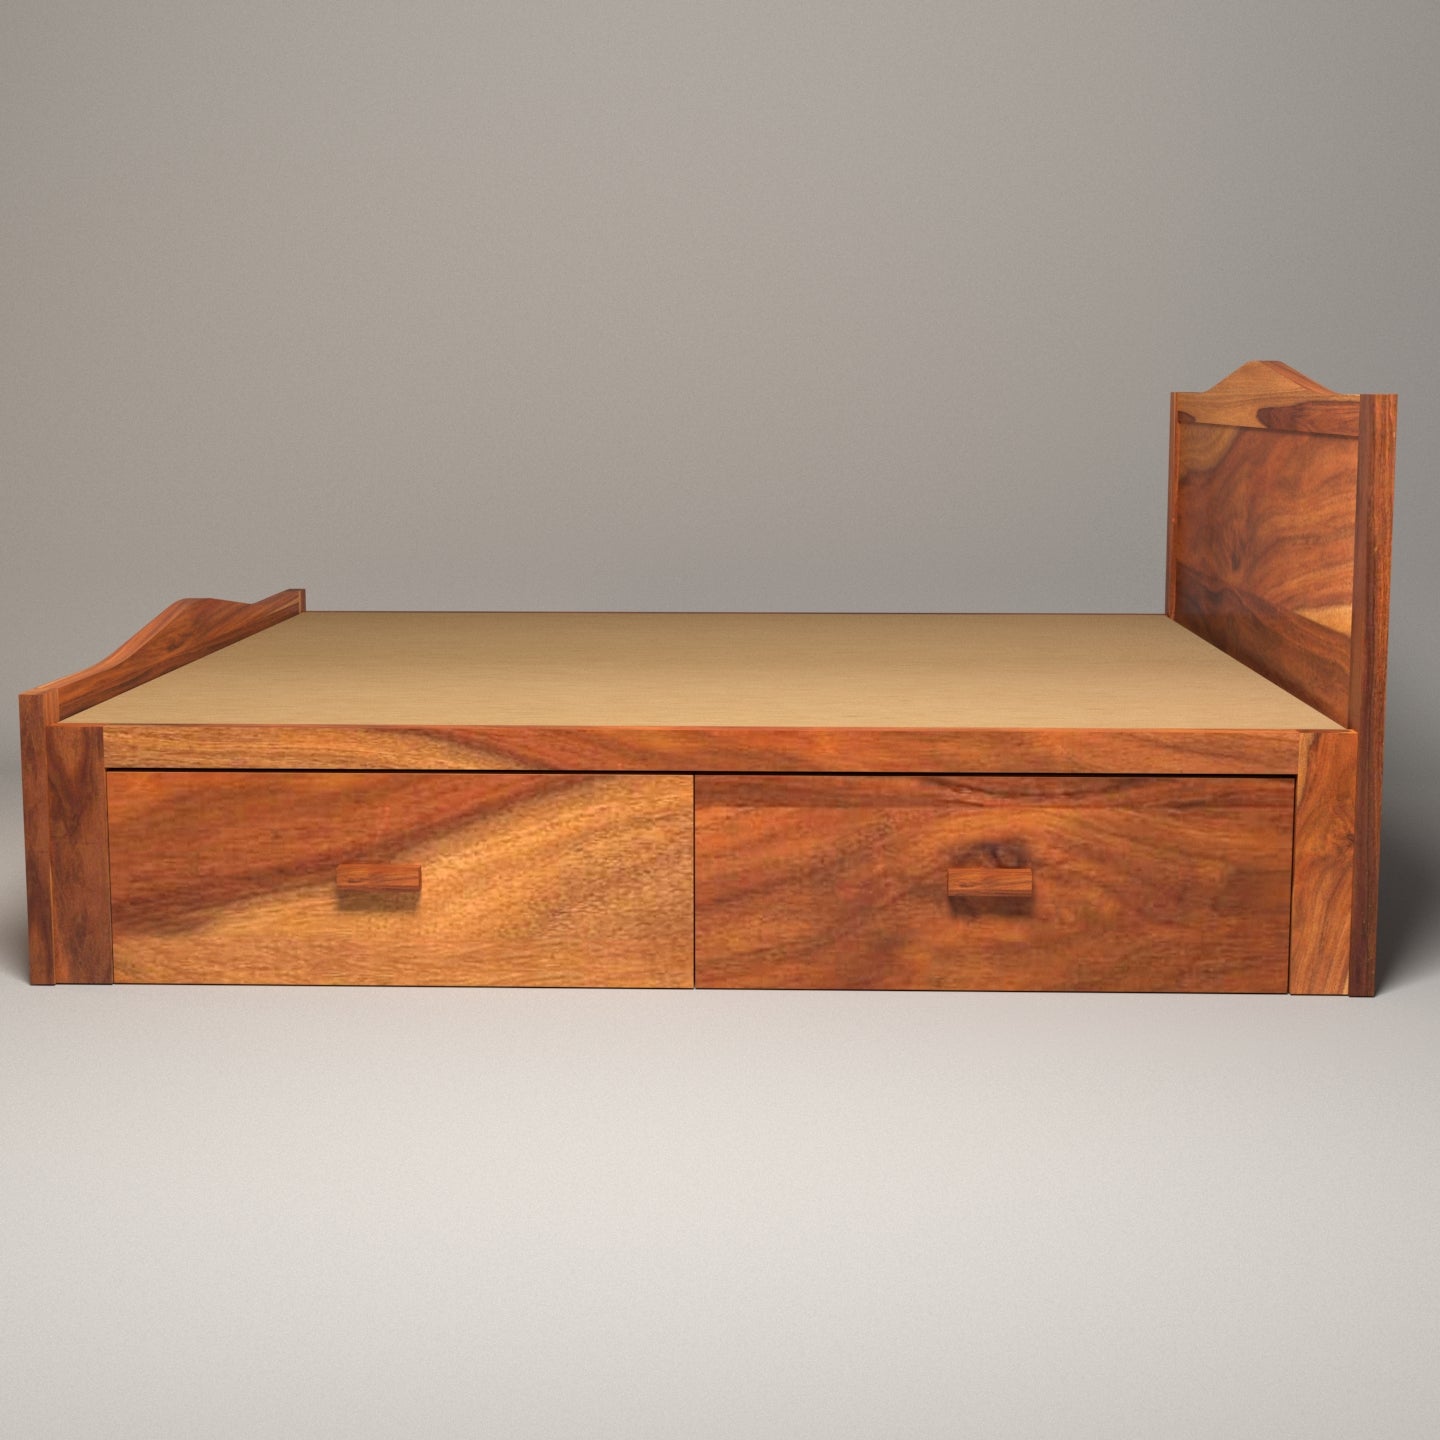 Elegant Handmade Sheesham Wooden Bed with Double Storage Bed